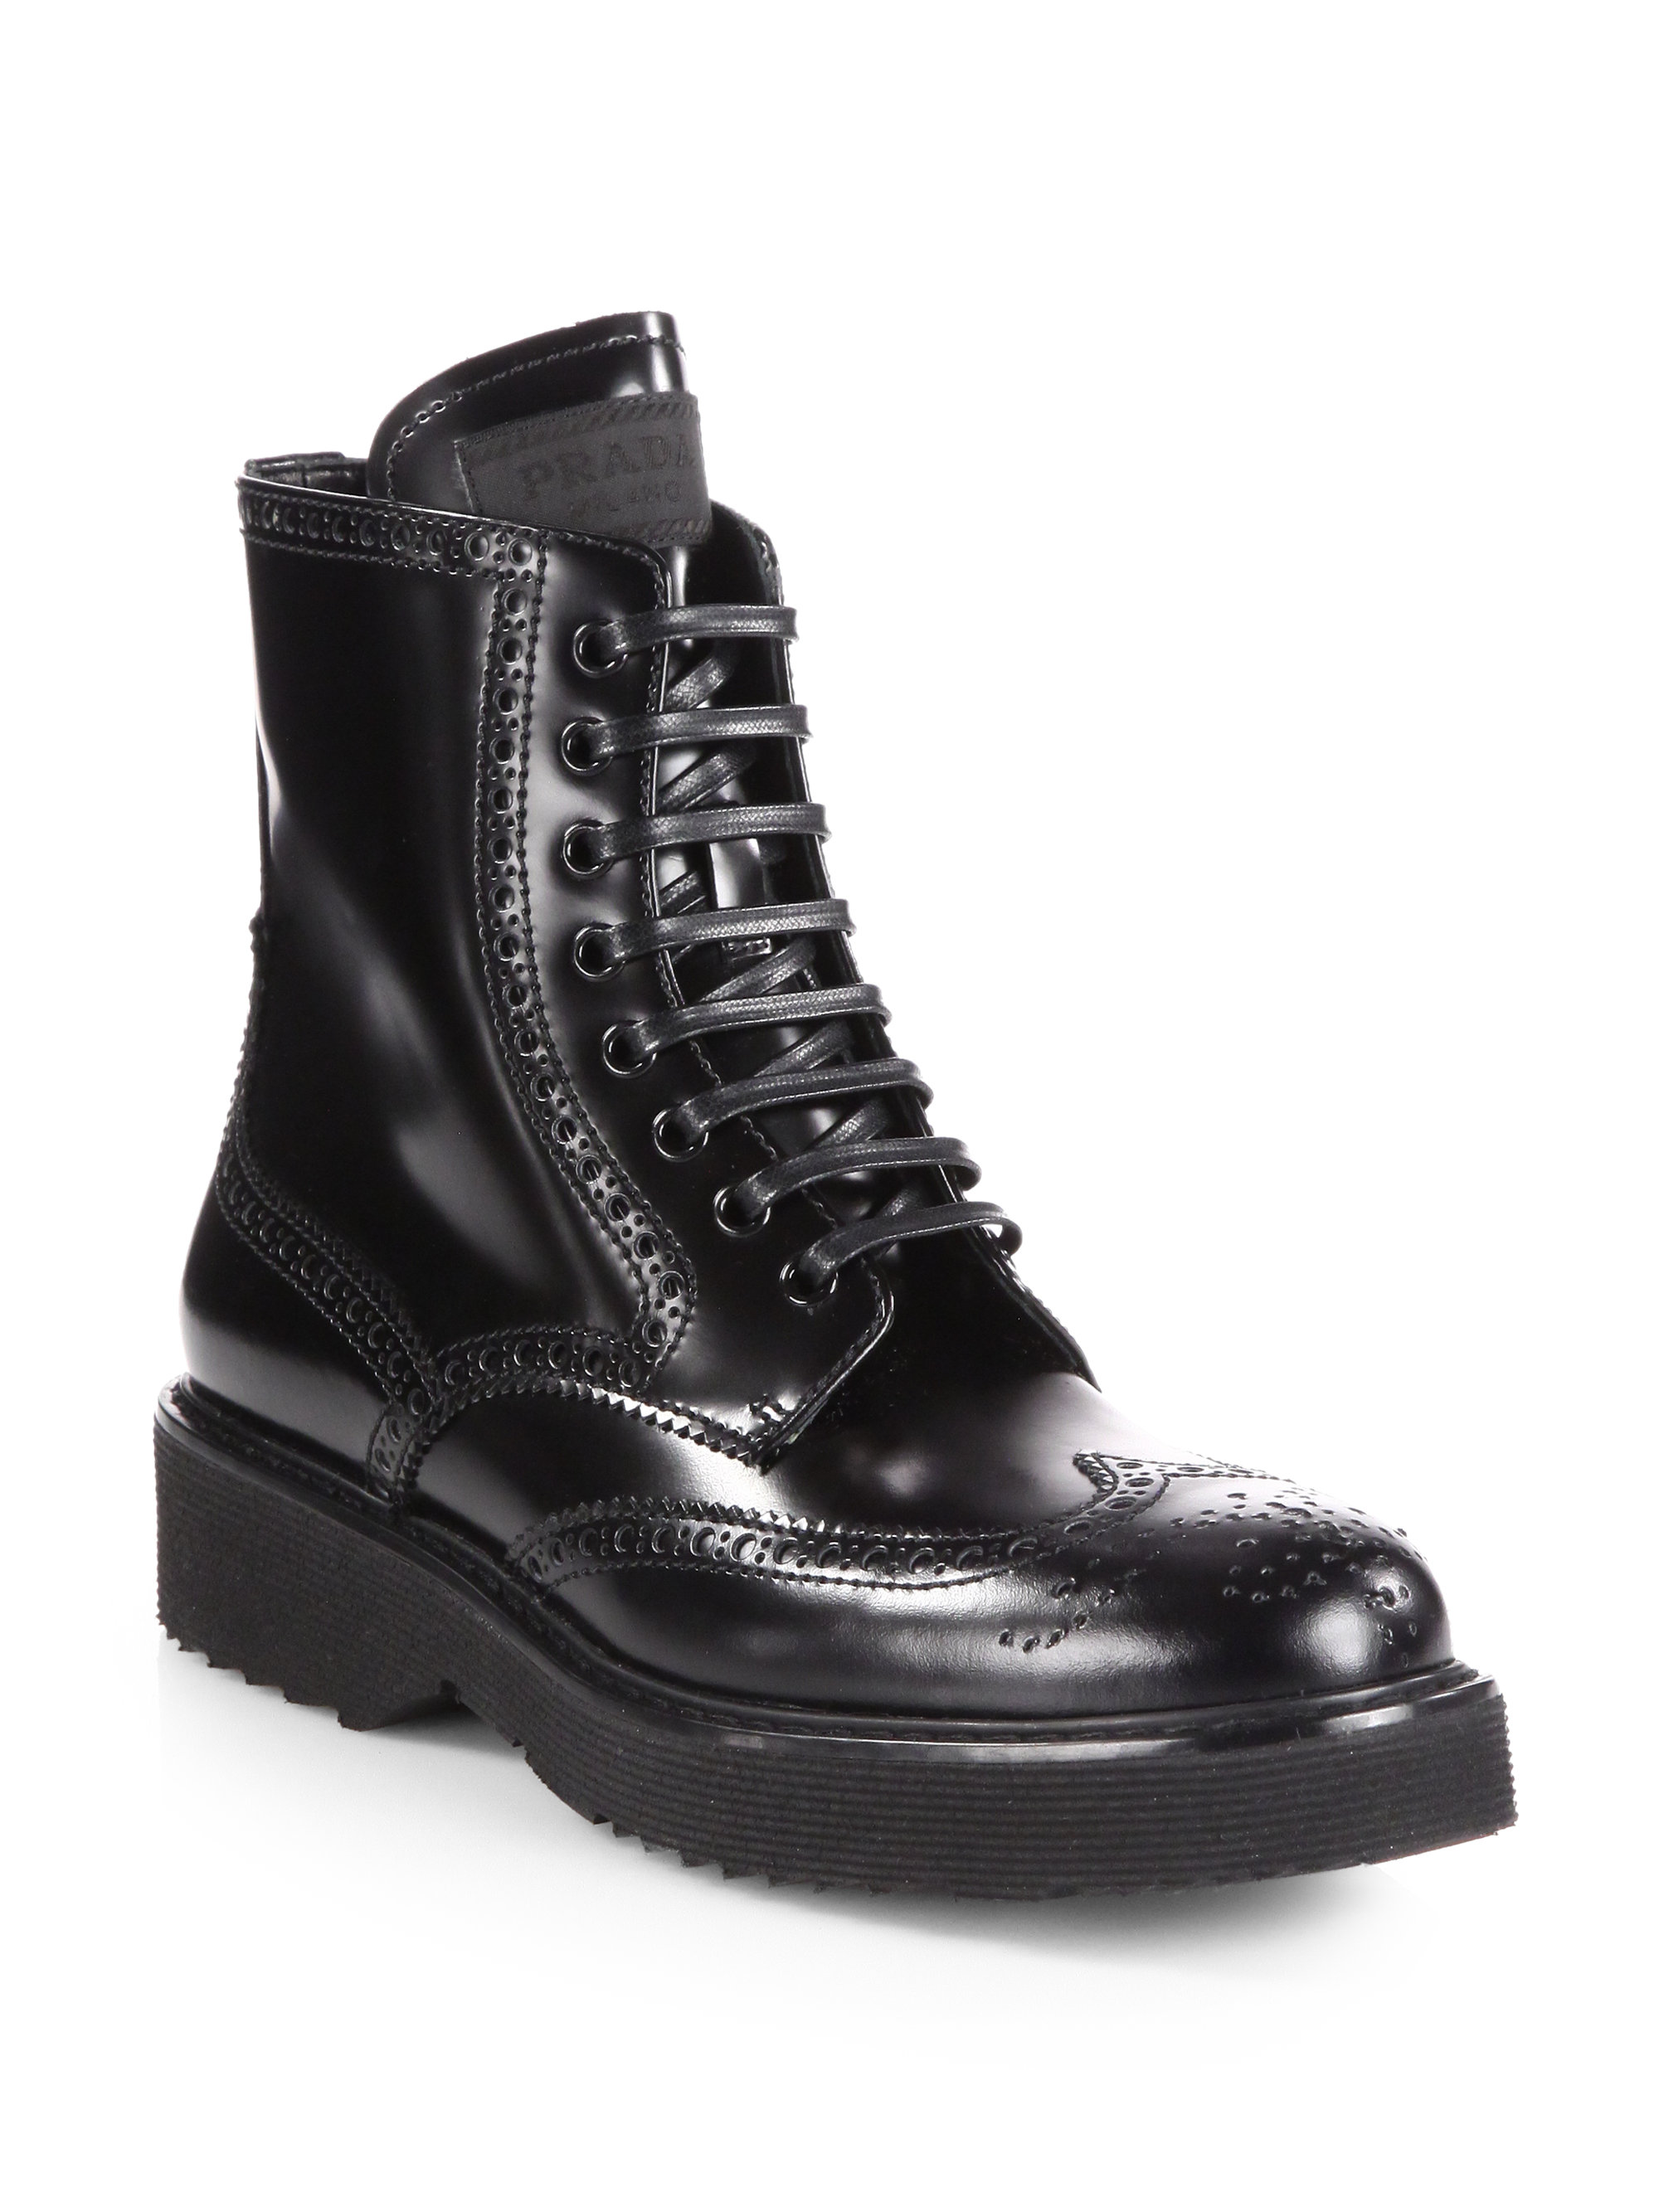 Prada Leather Wingtip Laceup Ankle Boots in Black | Lyst